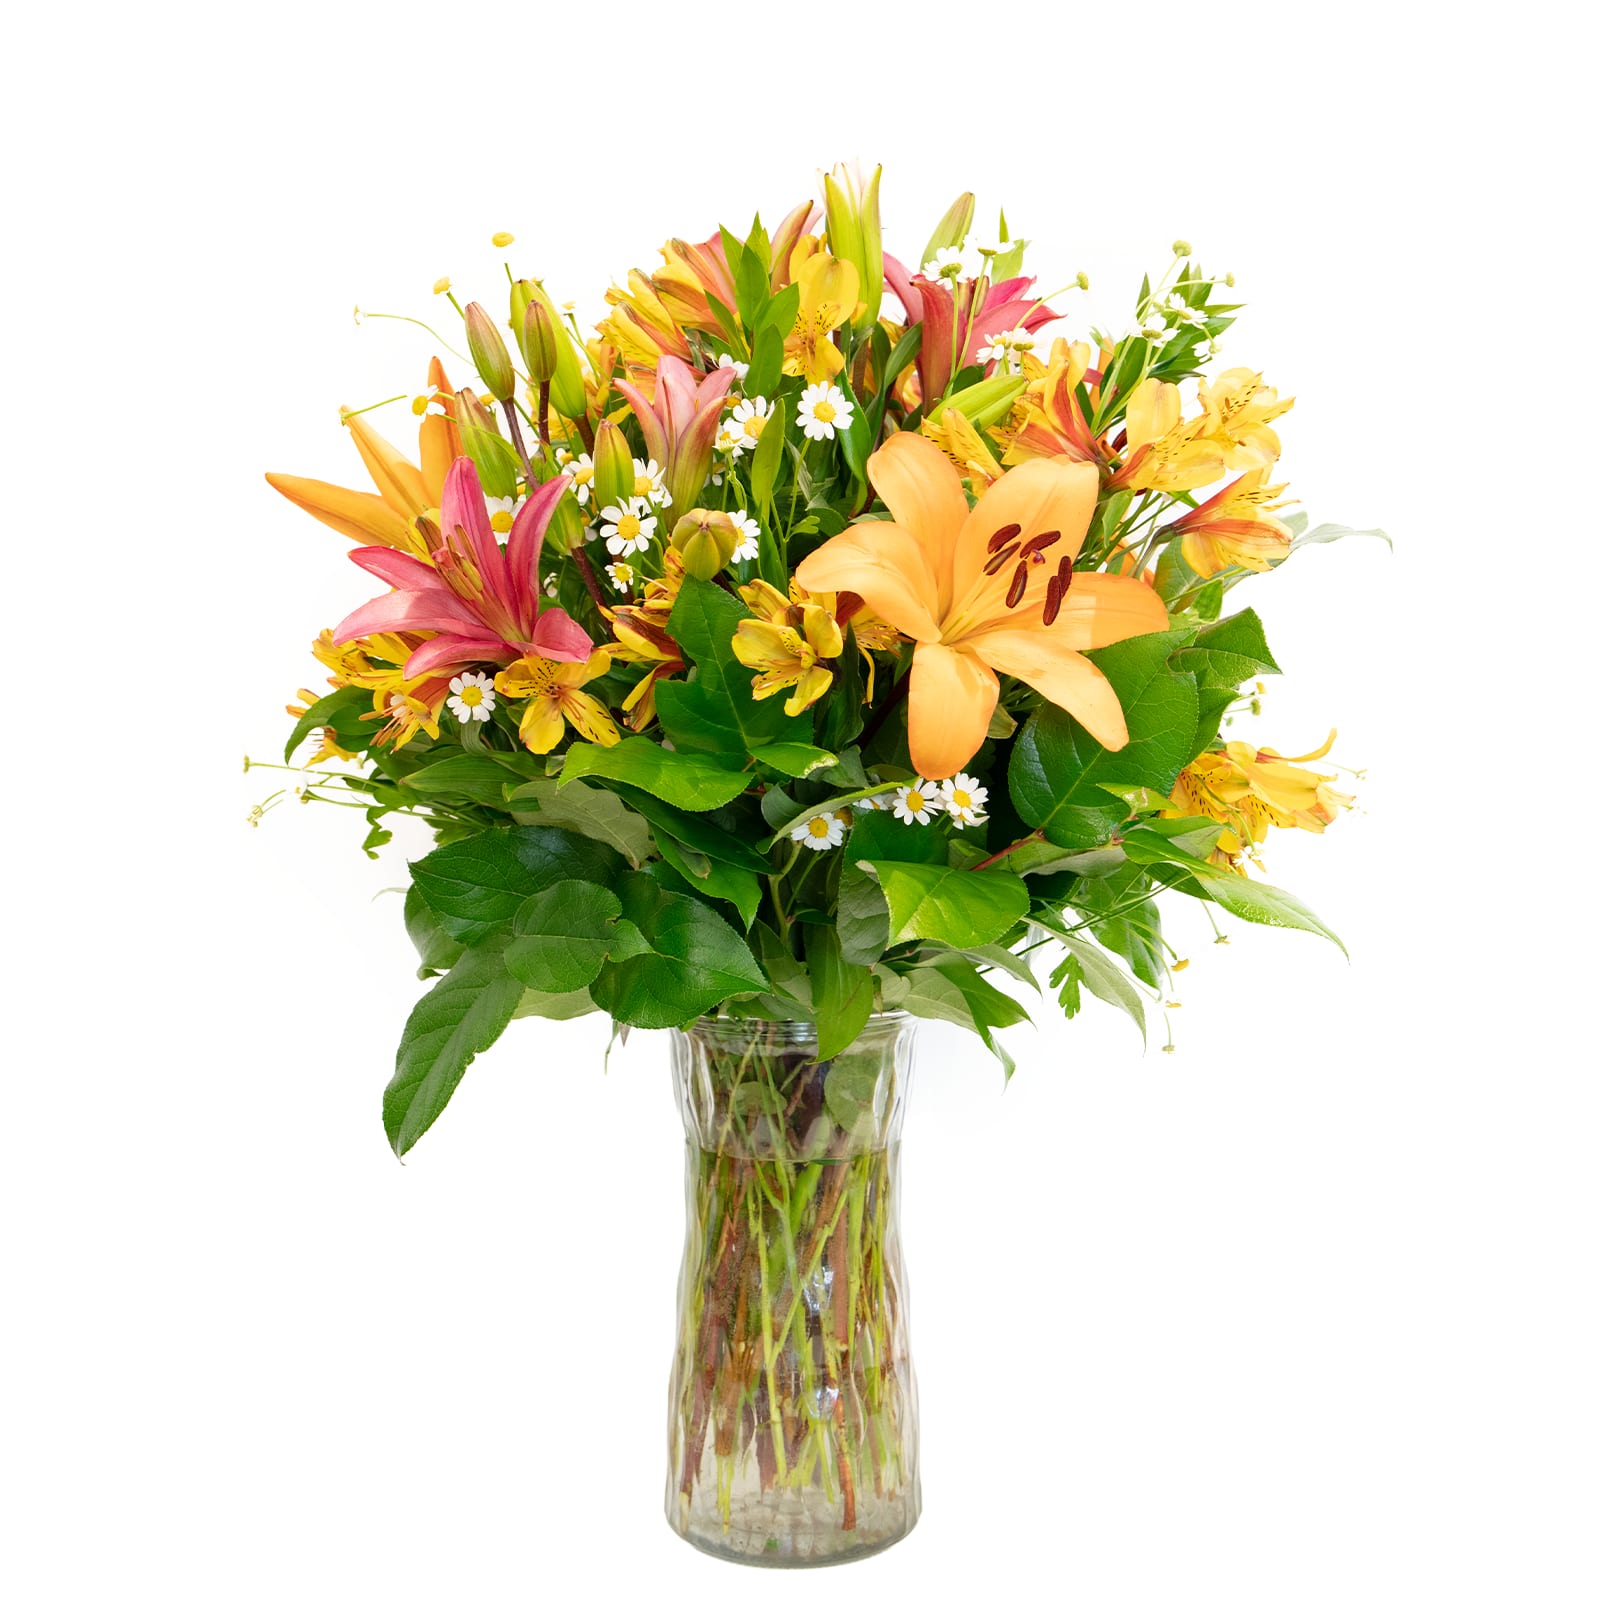 Lovely Lilies - Do you love lilies as much as we do? This ALL Lily blend is filled with colorful Asiatic Lilies.  Fill your home with Spring fragrance and flowers that will pop!